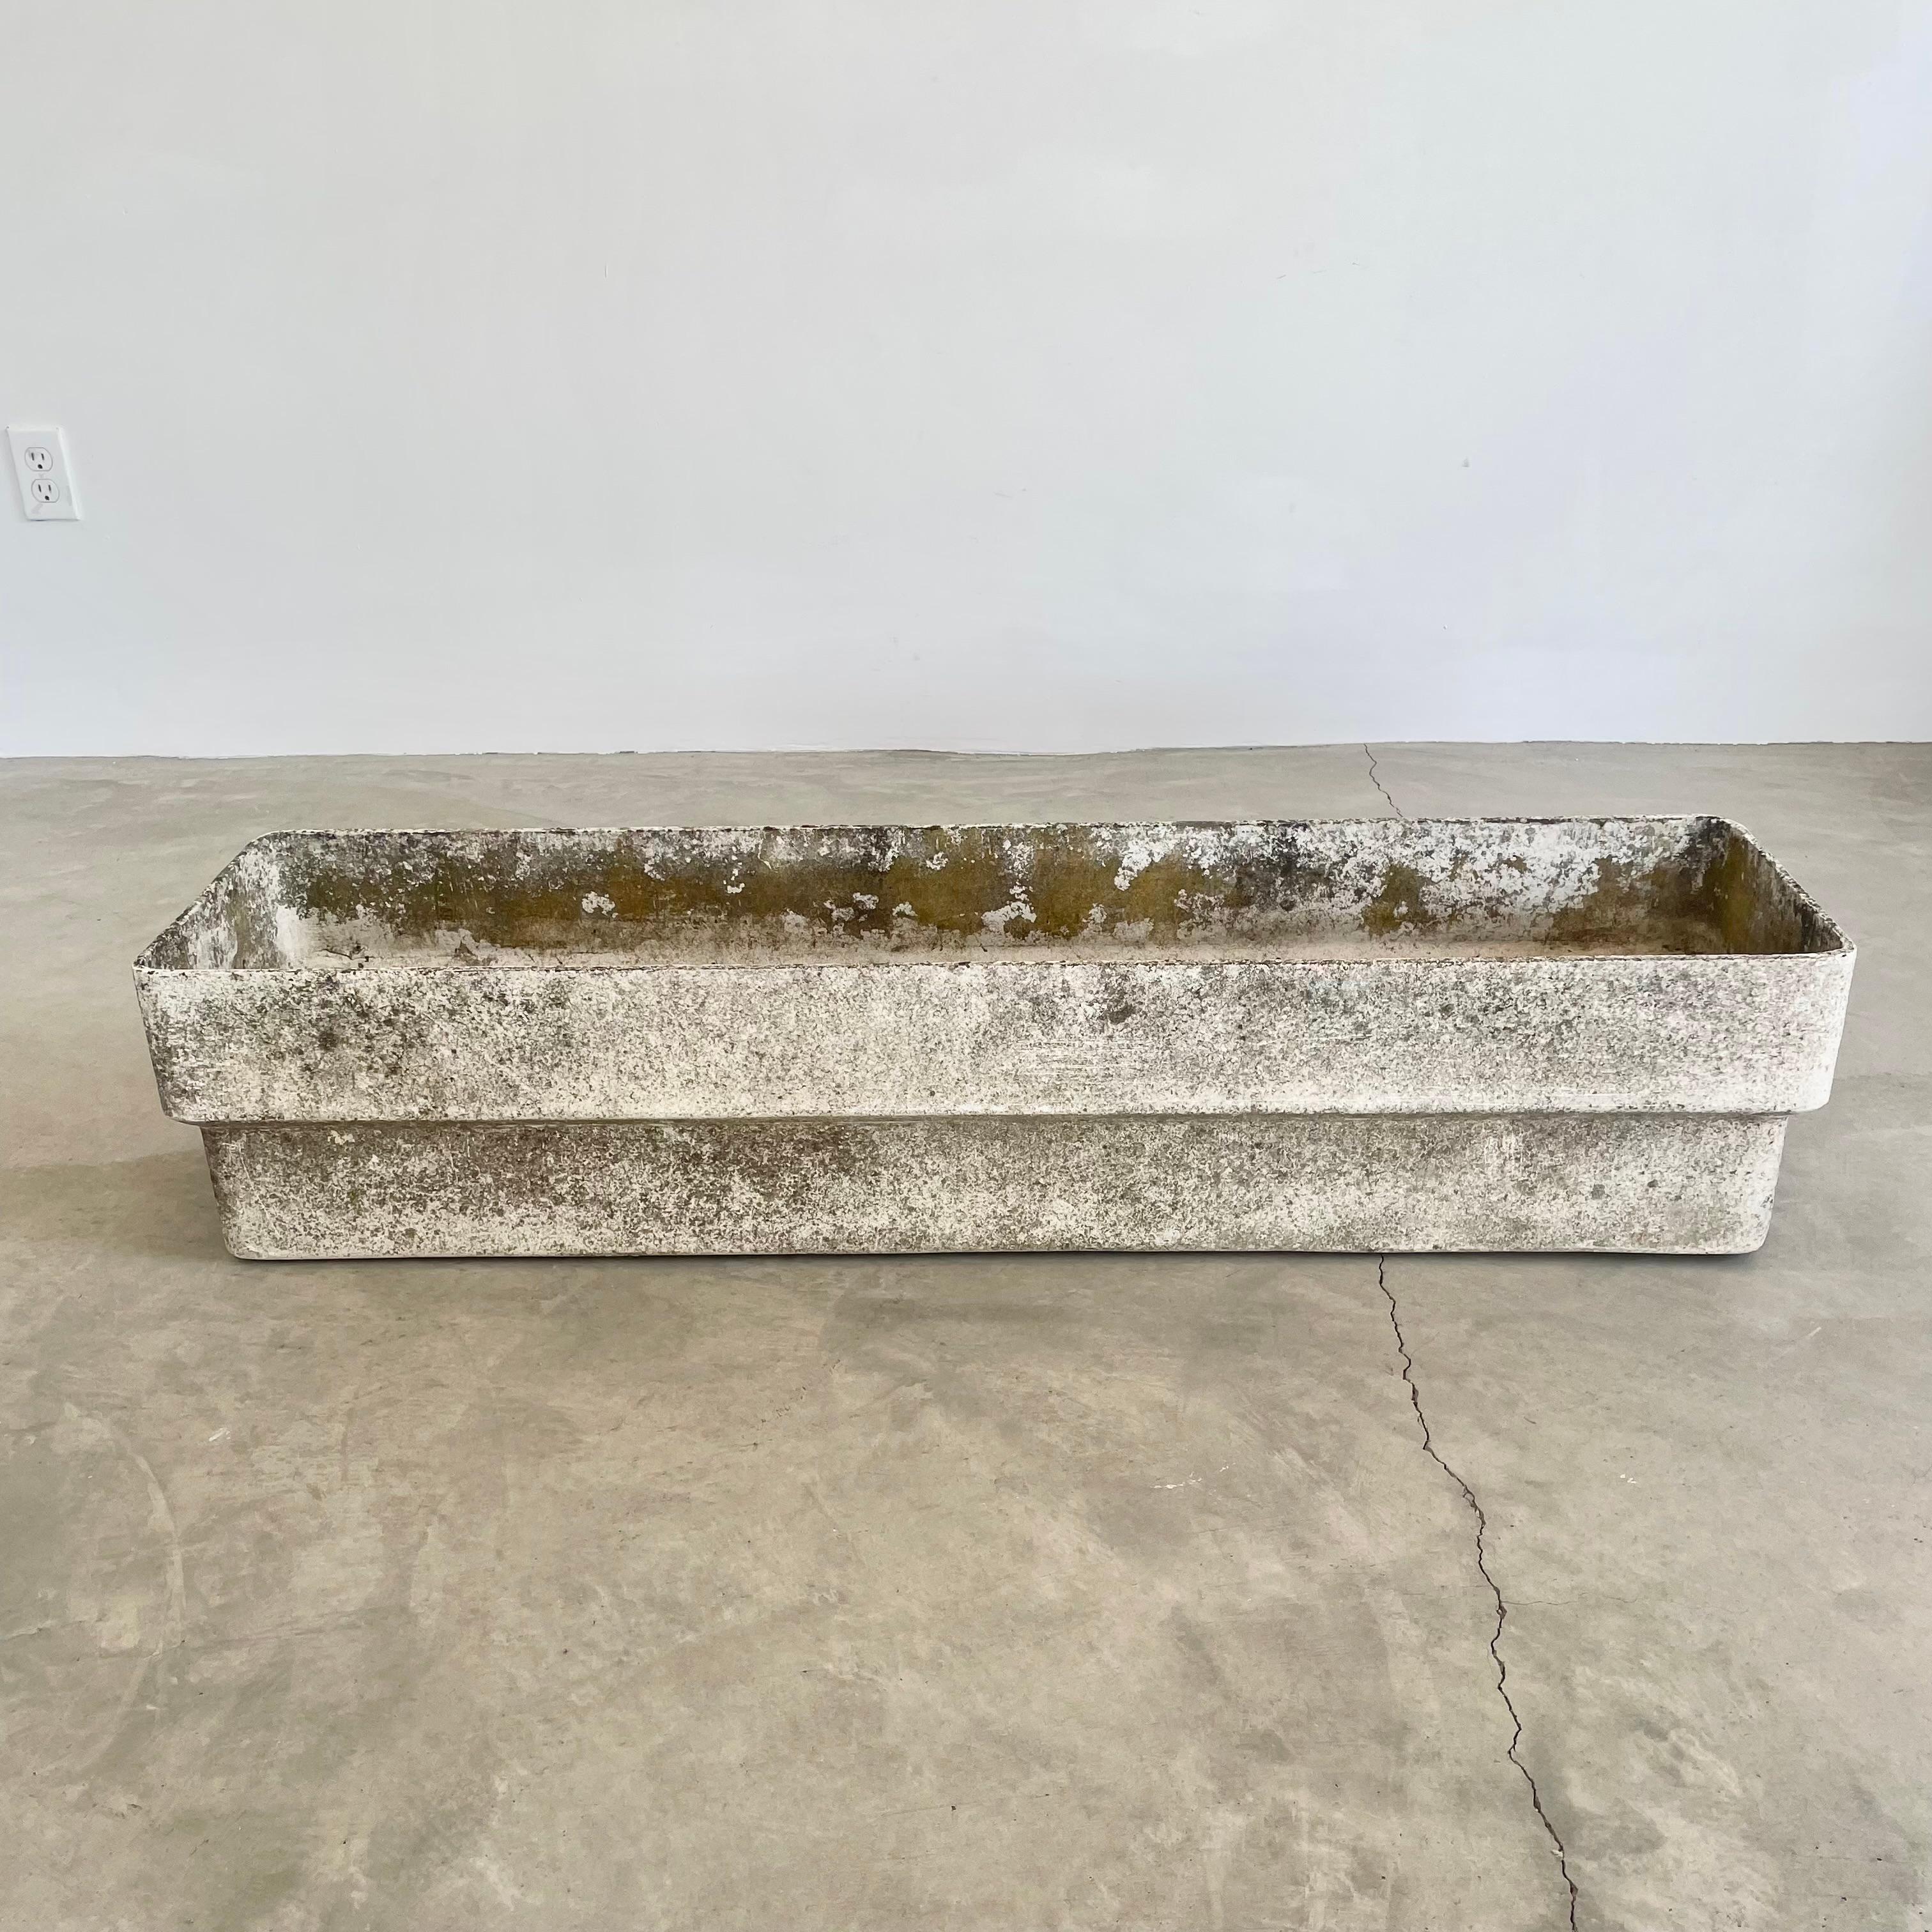 Rare and unique large trough planters by Swiss architect and industrial design pioneer Willy Guhl for Eternit, Switzerland circa 1960s. All are in a white and aged paint with perfect patina. A subtle ridge is cast around the body of each planter